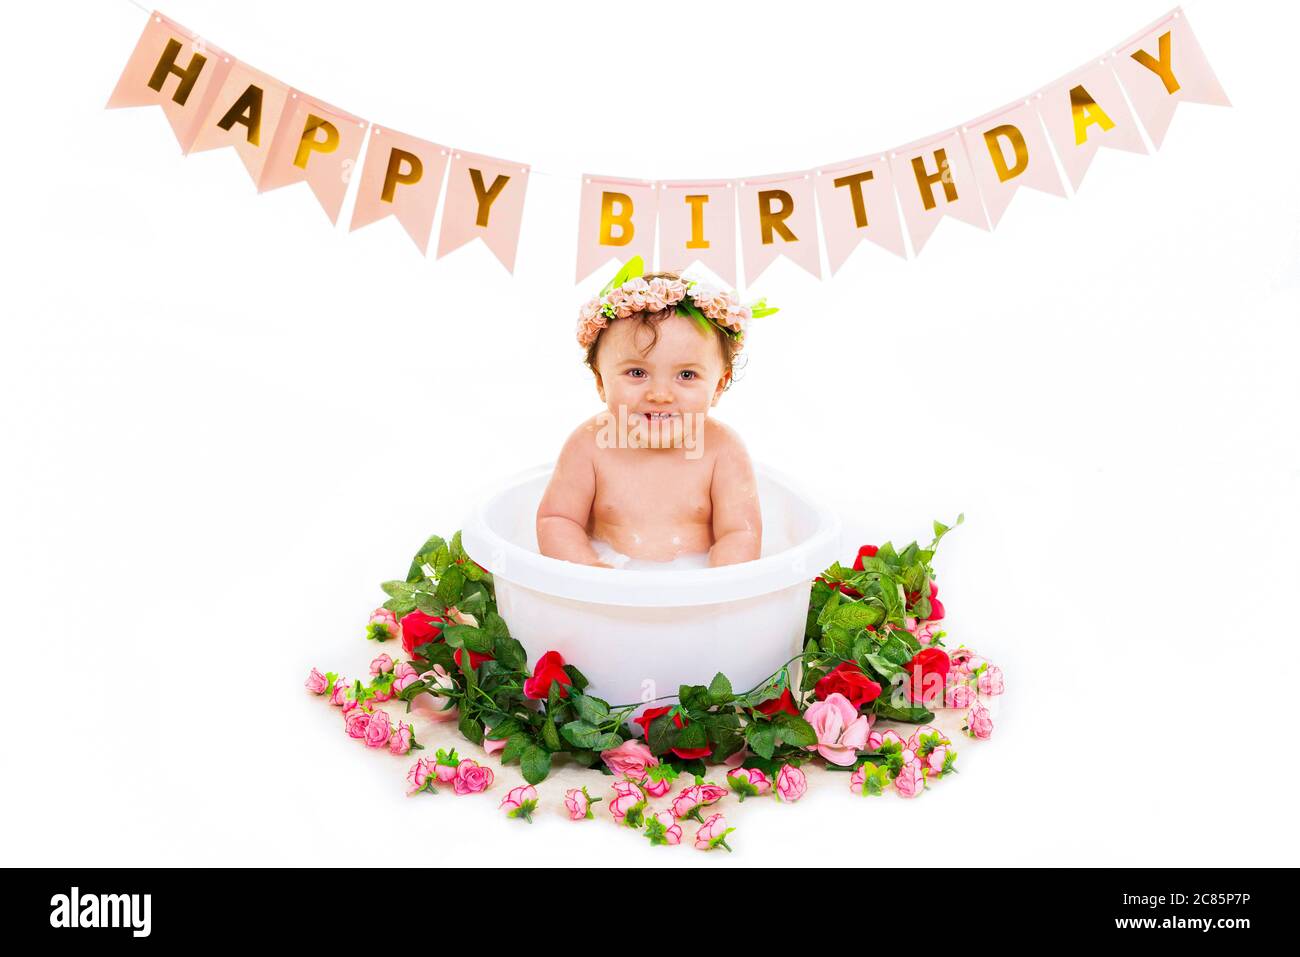 Horizontal lifestyle portrait of a baby girl in a bath on her first birthday. Stock Photo